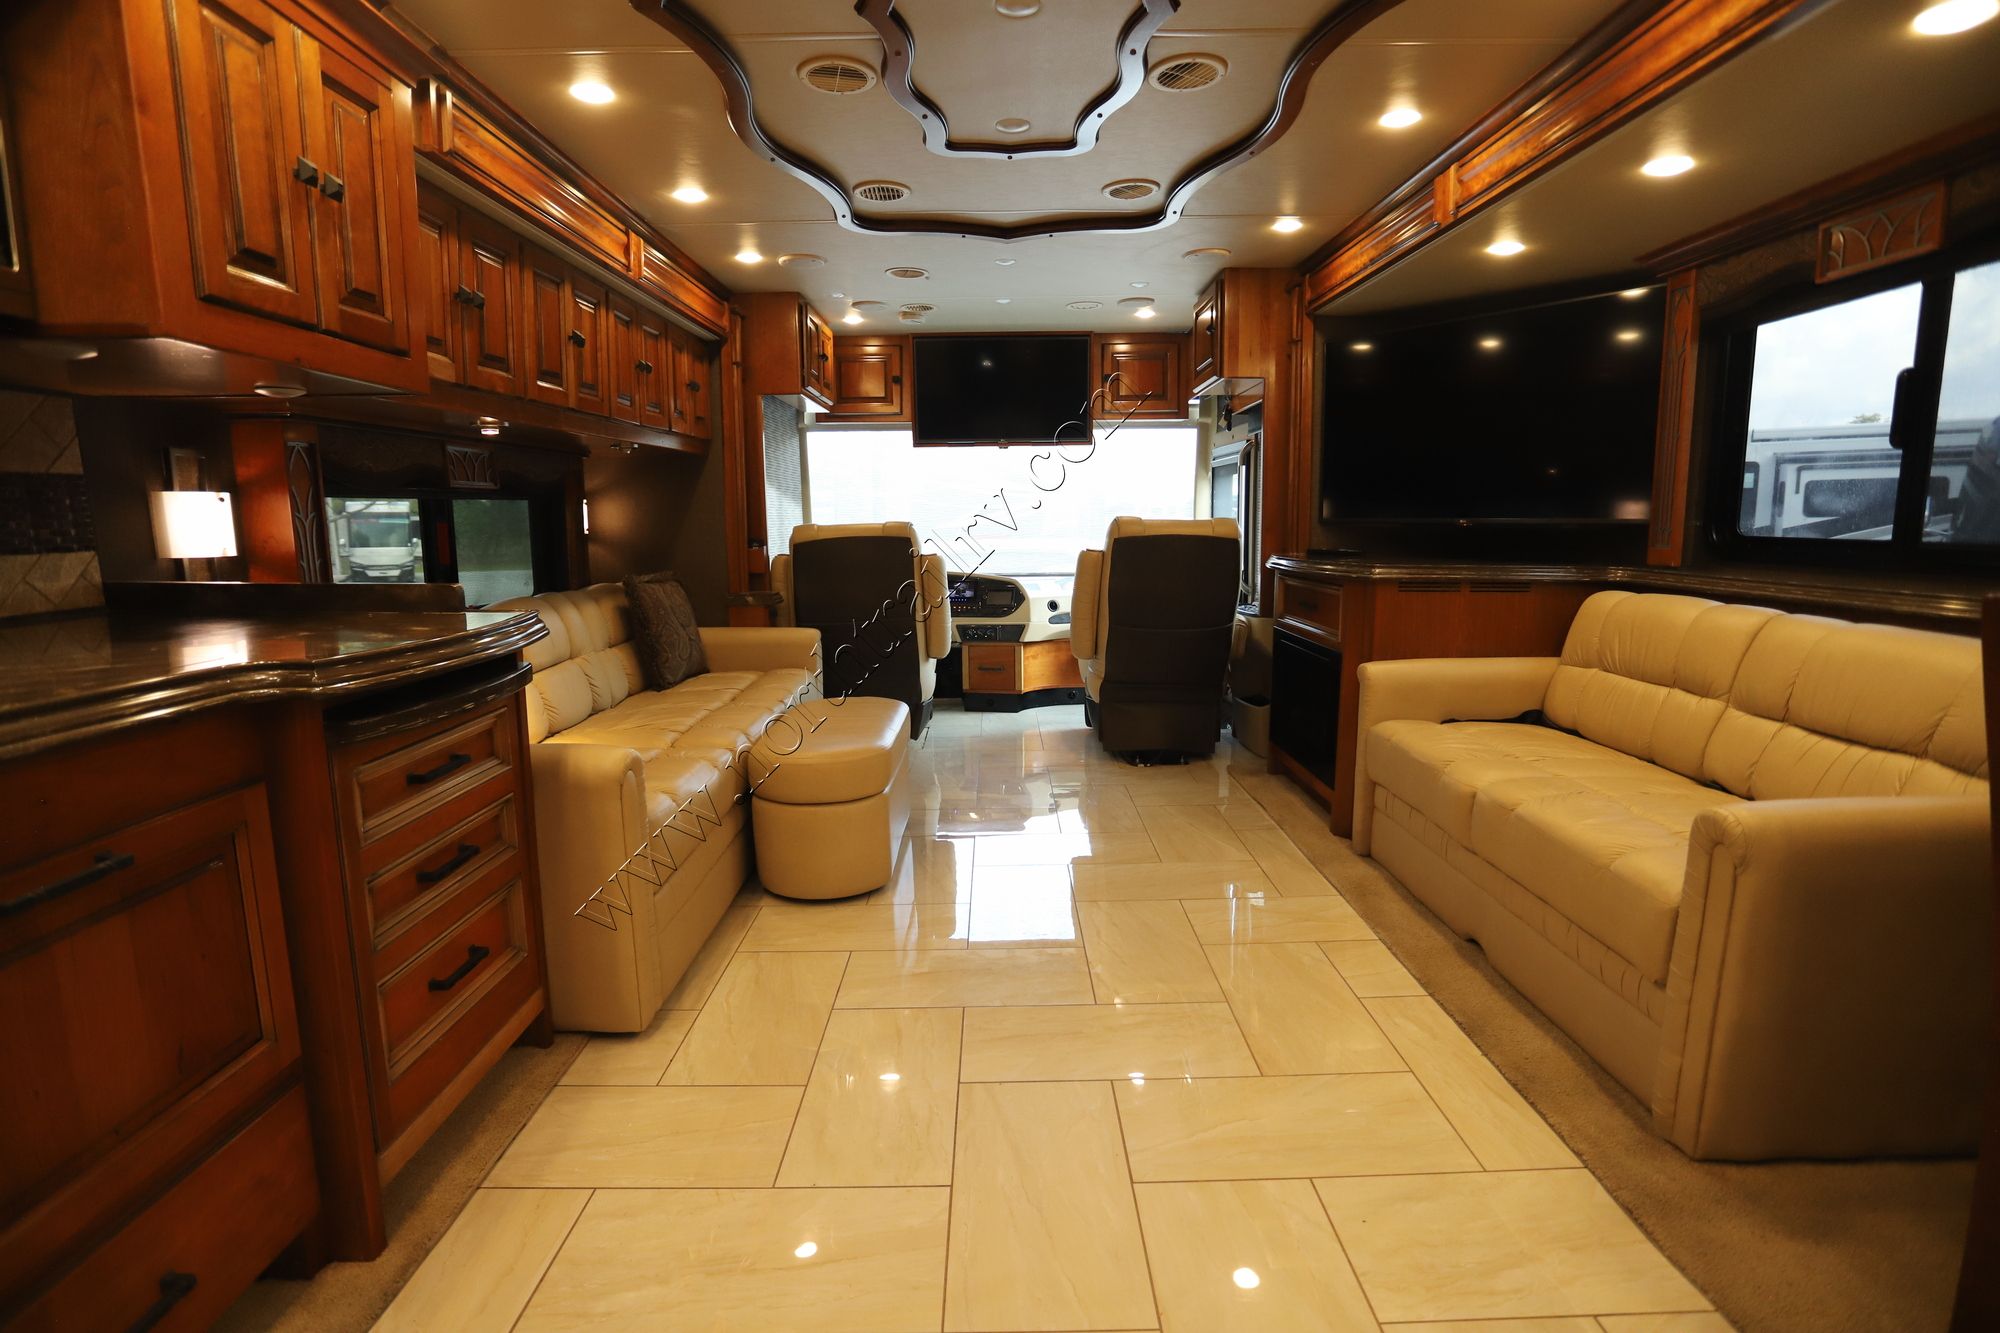 Used 2016 Tiffin Motor Homes Allegro Bus 45OP Class A  For Sale